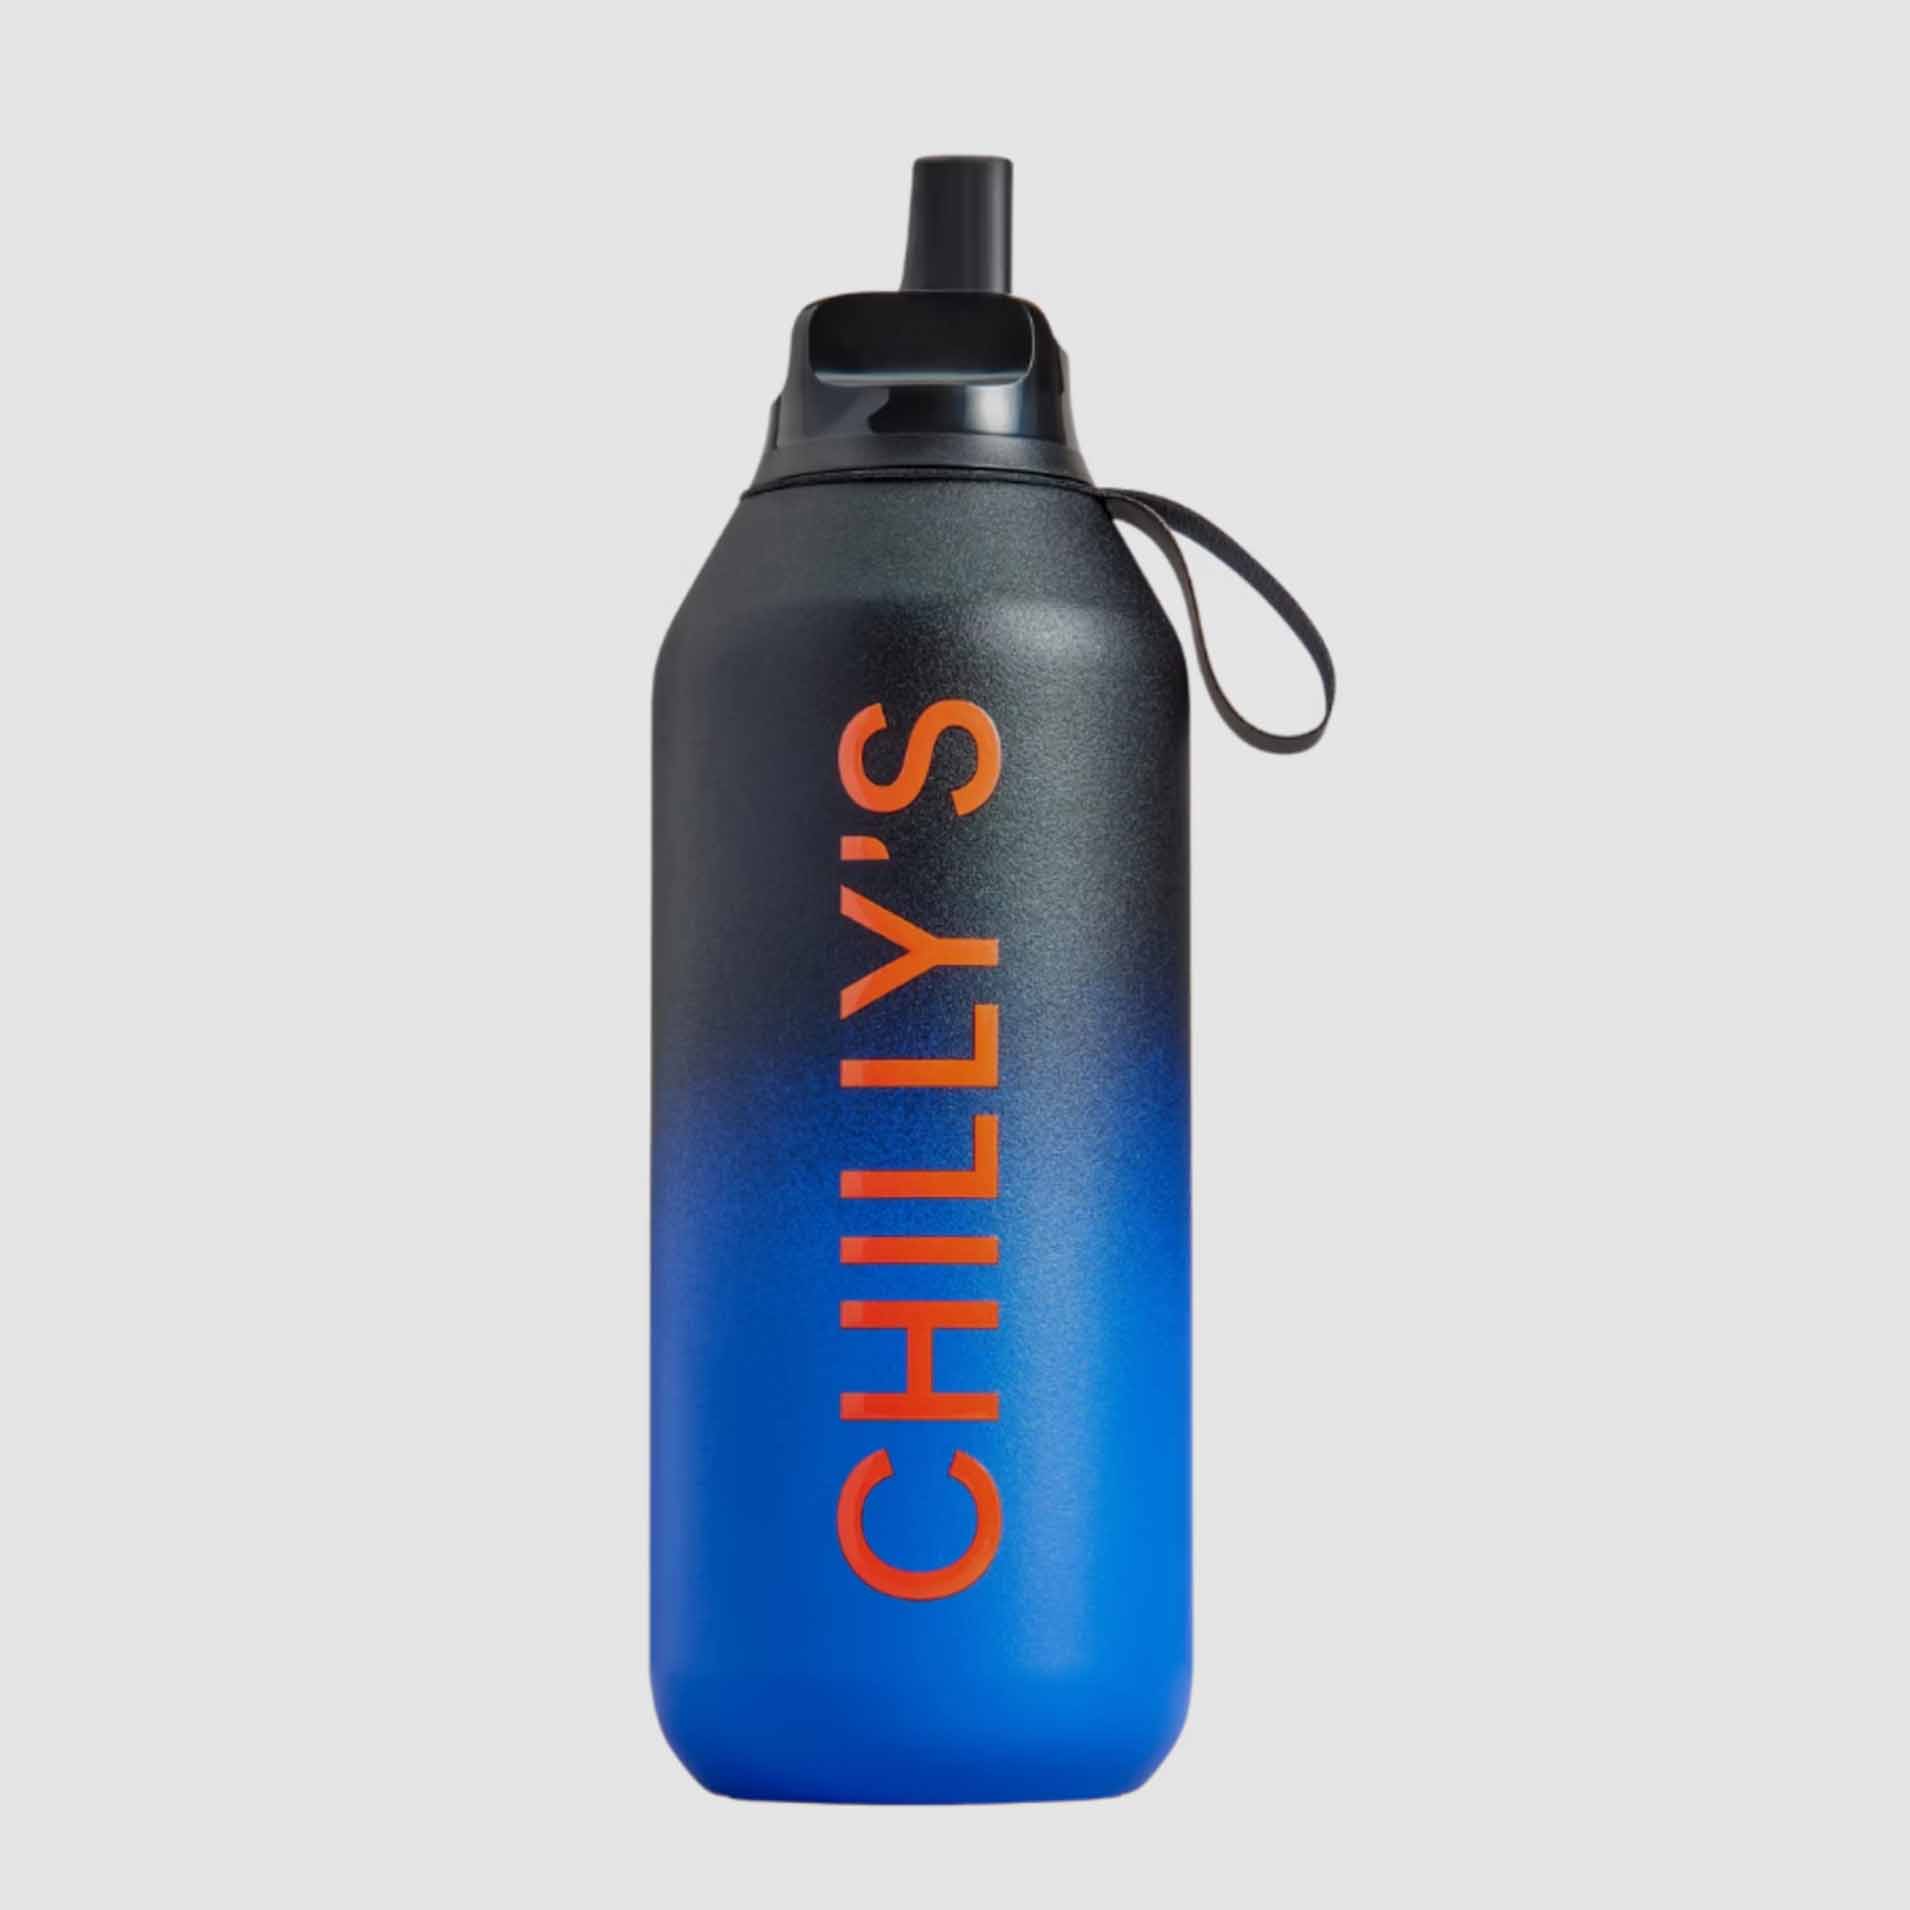 Midnight Flip Bottle by Chilly's in a blue and black ombre design